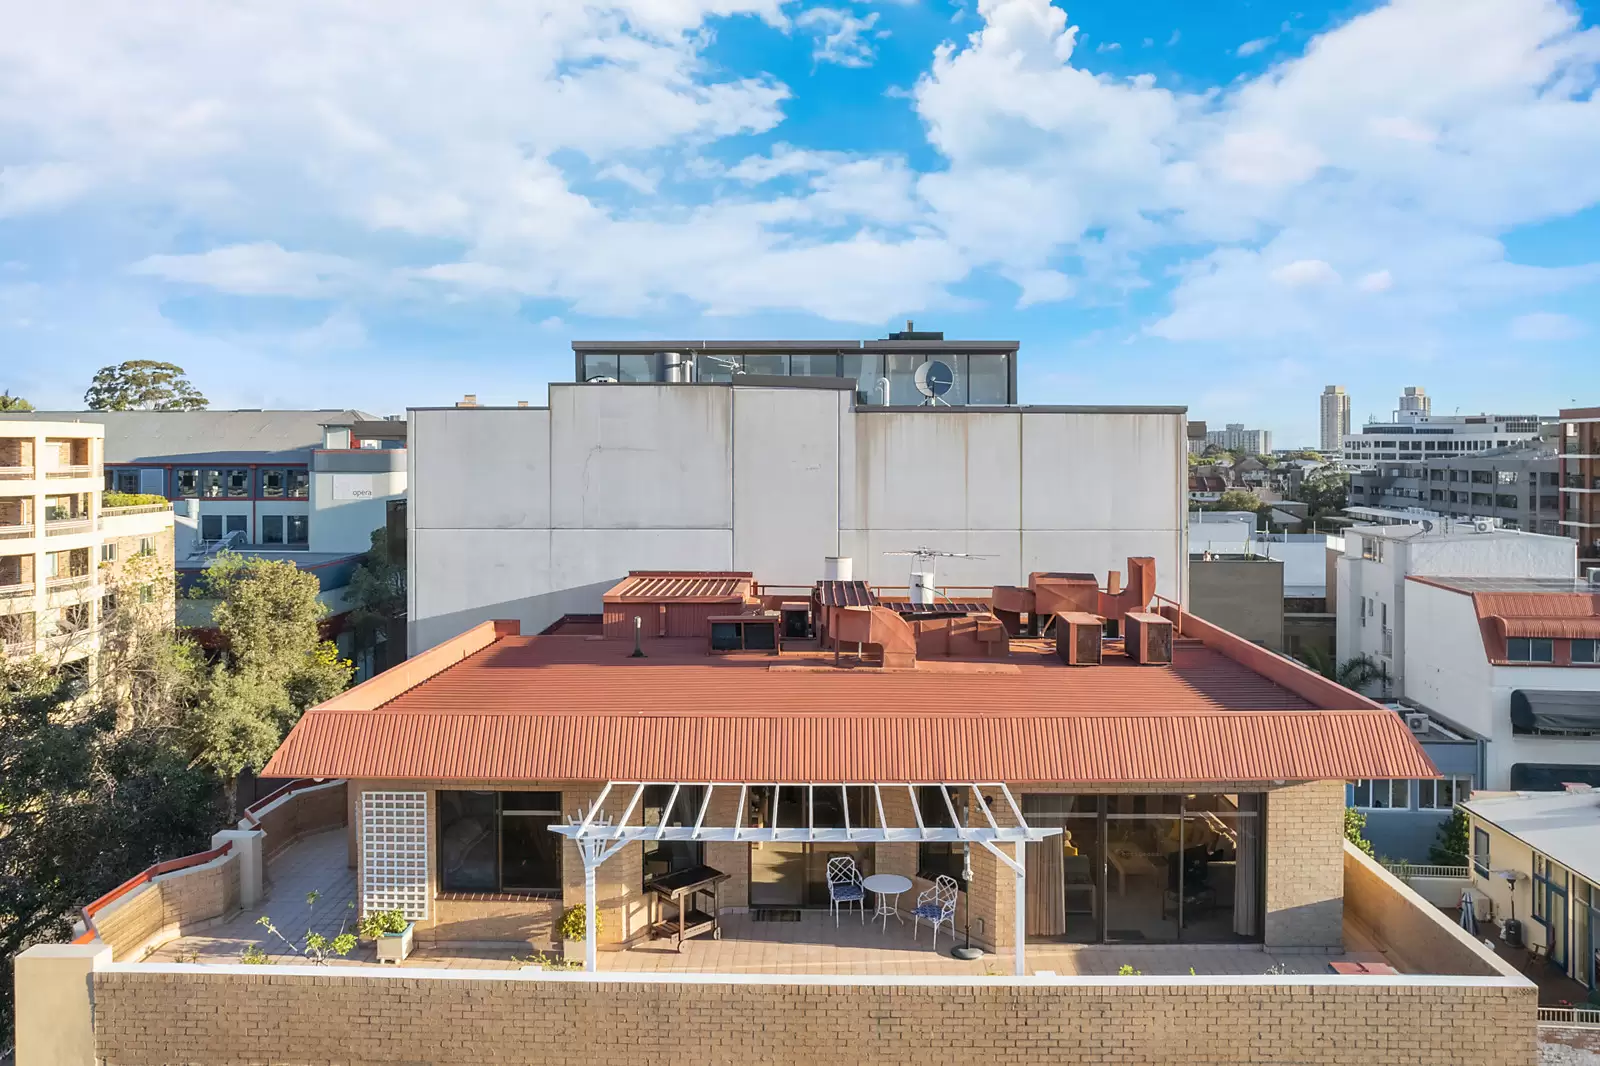 Photo #11: 491-493 Elizabeth Street, Surry Hills - For Sale by Sydney Sotheby's International Realty